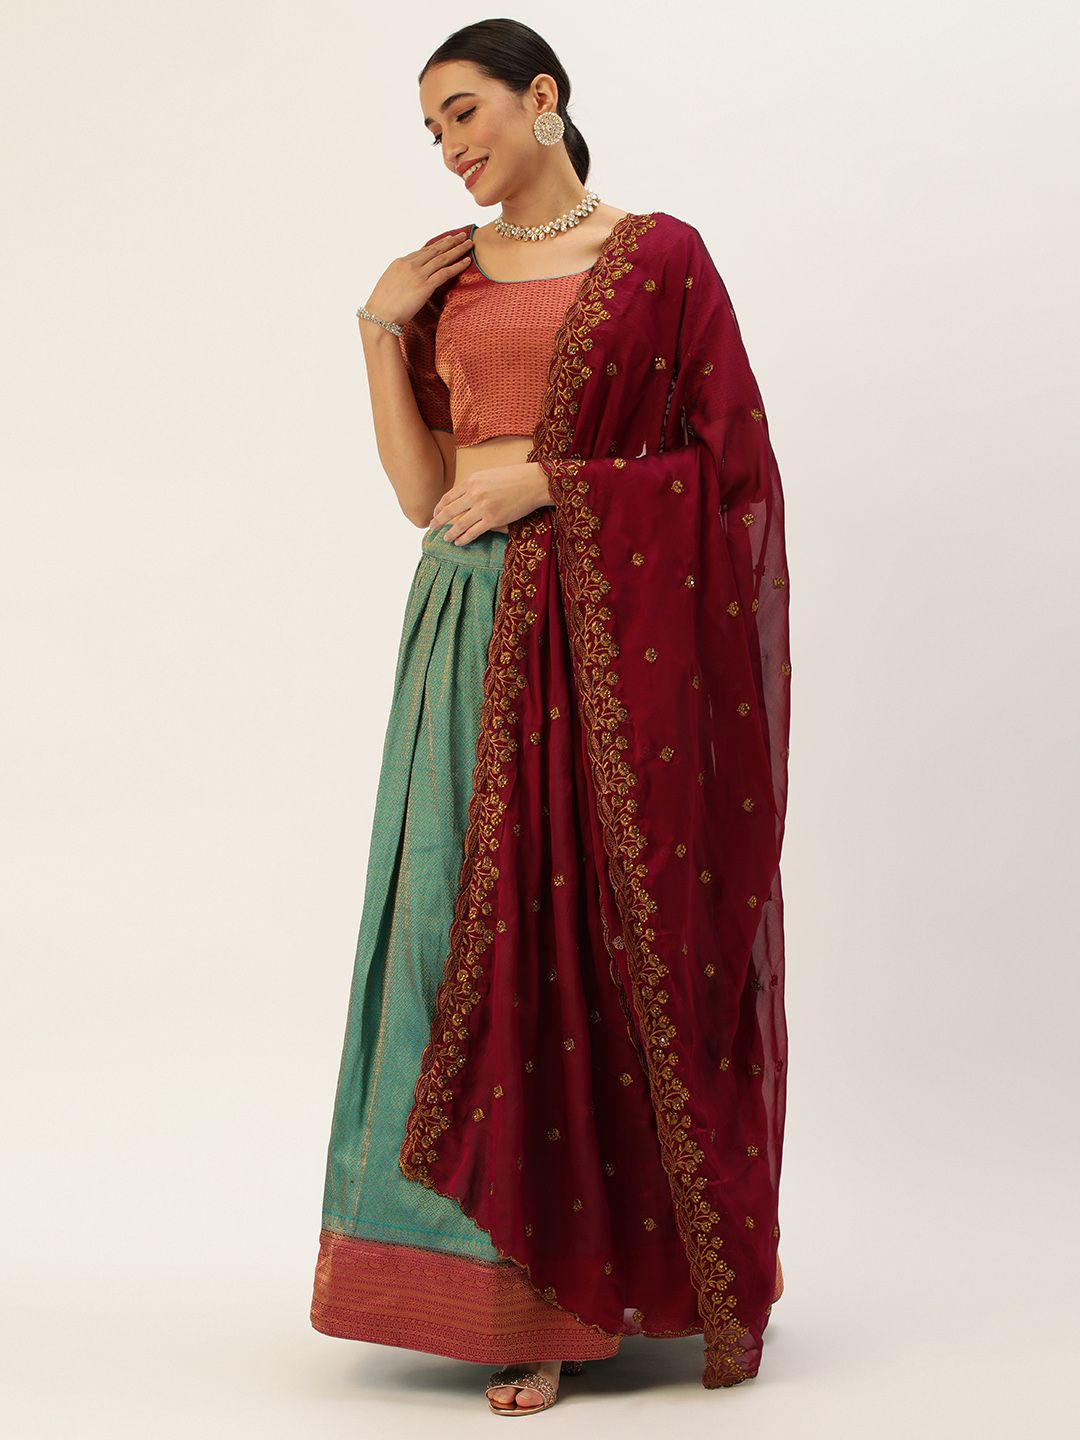 Pothys Woven Design Unstitched Lehenga & Blouse With Dupatta Price in India